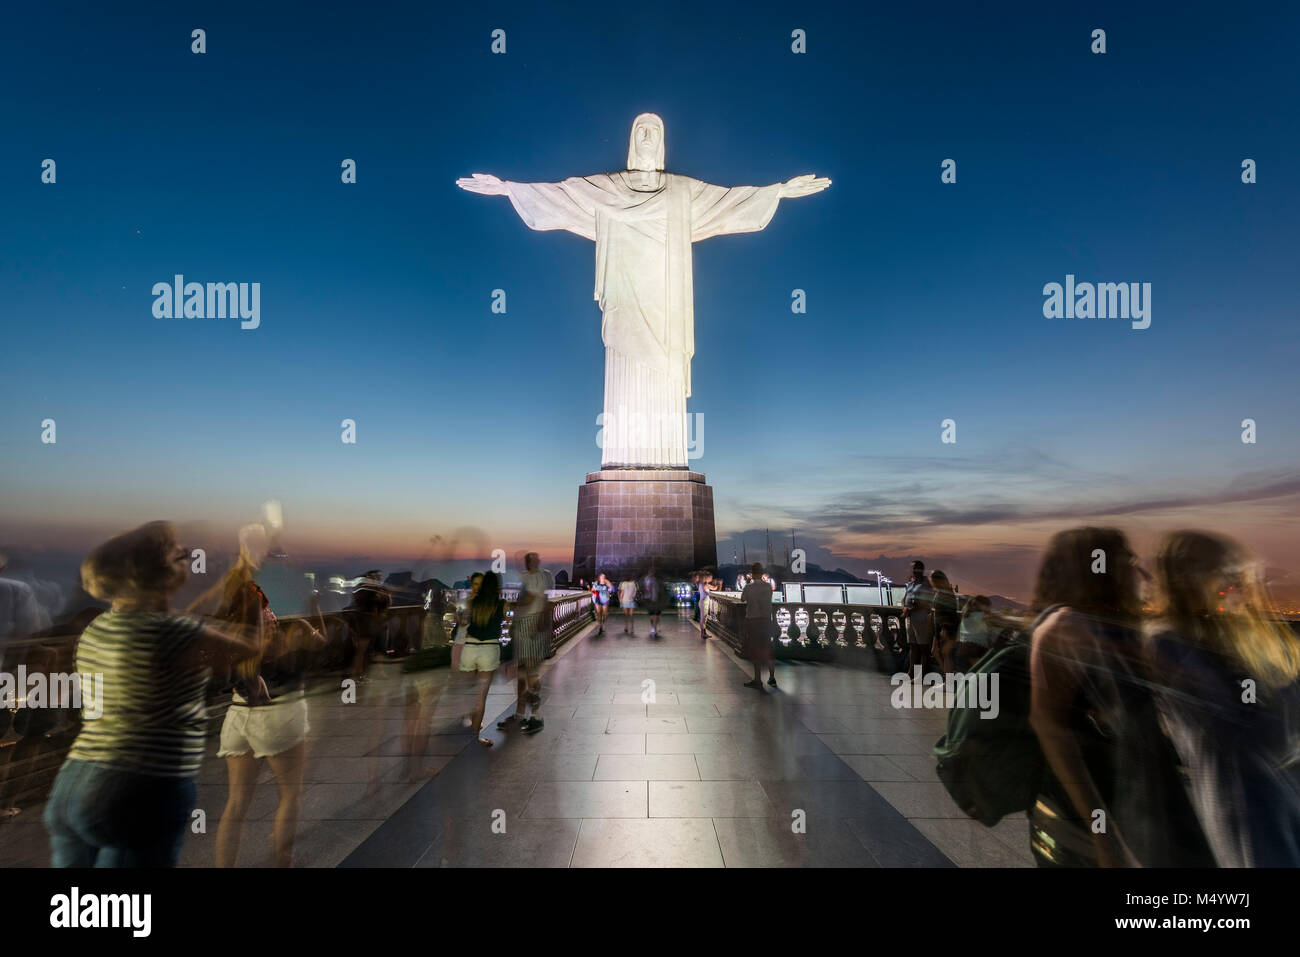 Christ the Redeemer statue with tourists at sunset, Corcovado Mountain, Rio de Janeiro, Brazil Stock Photo